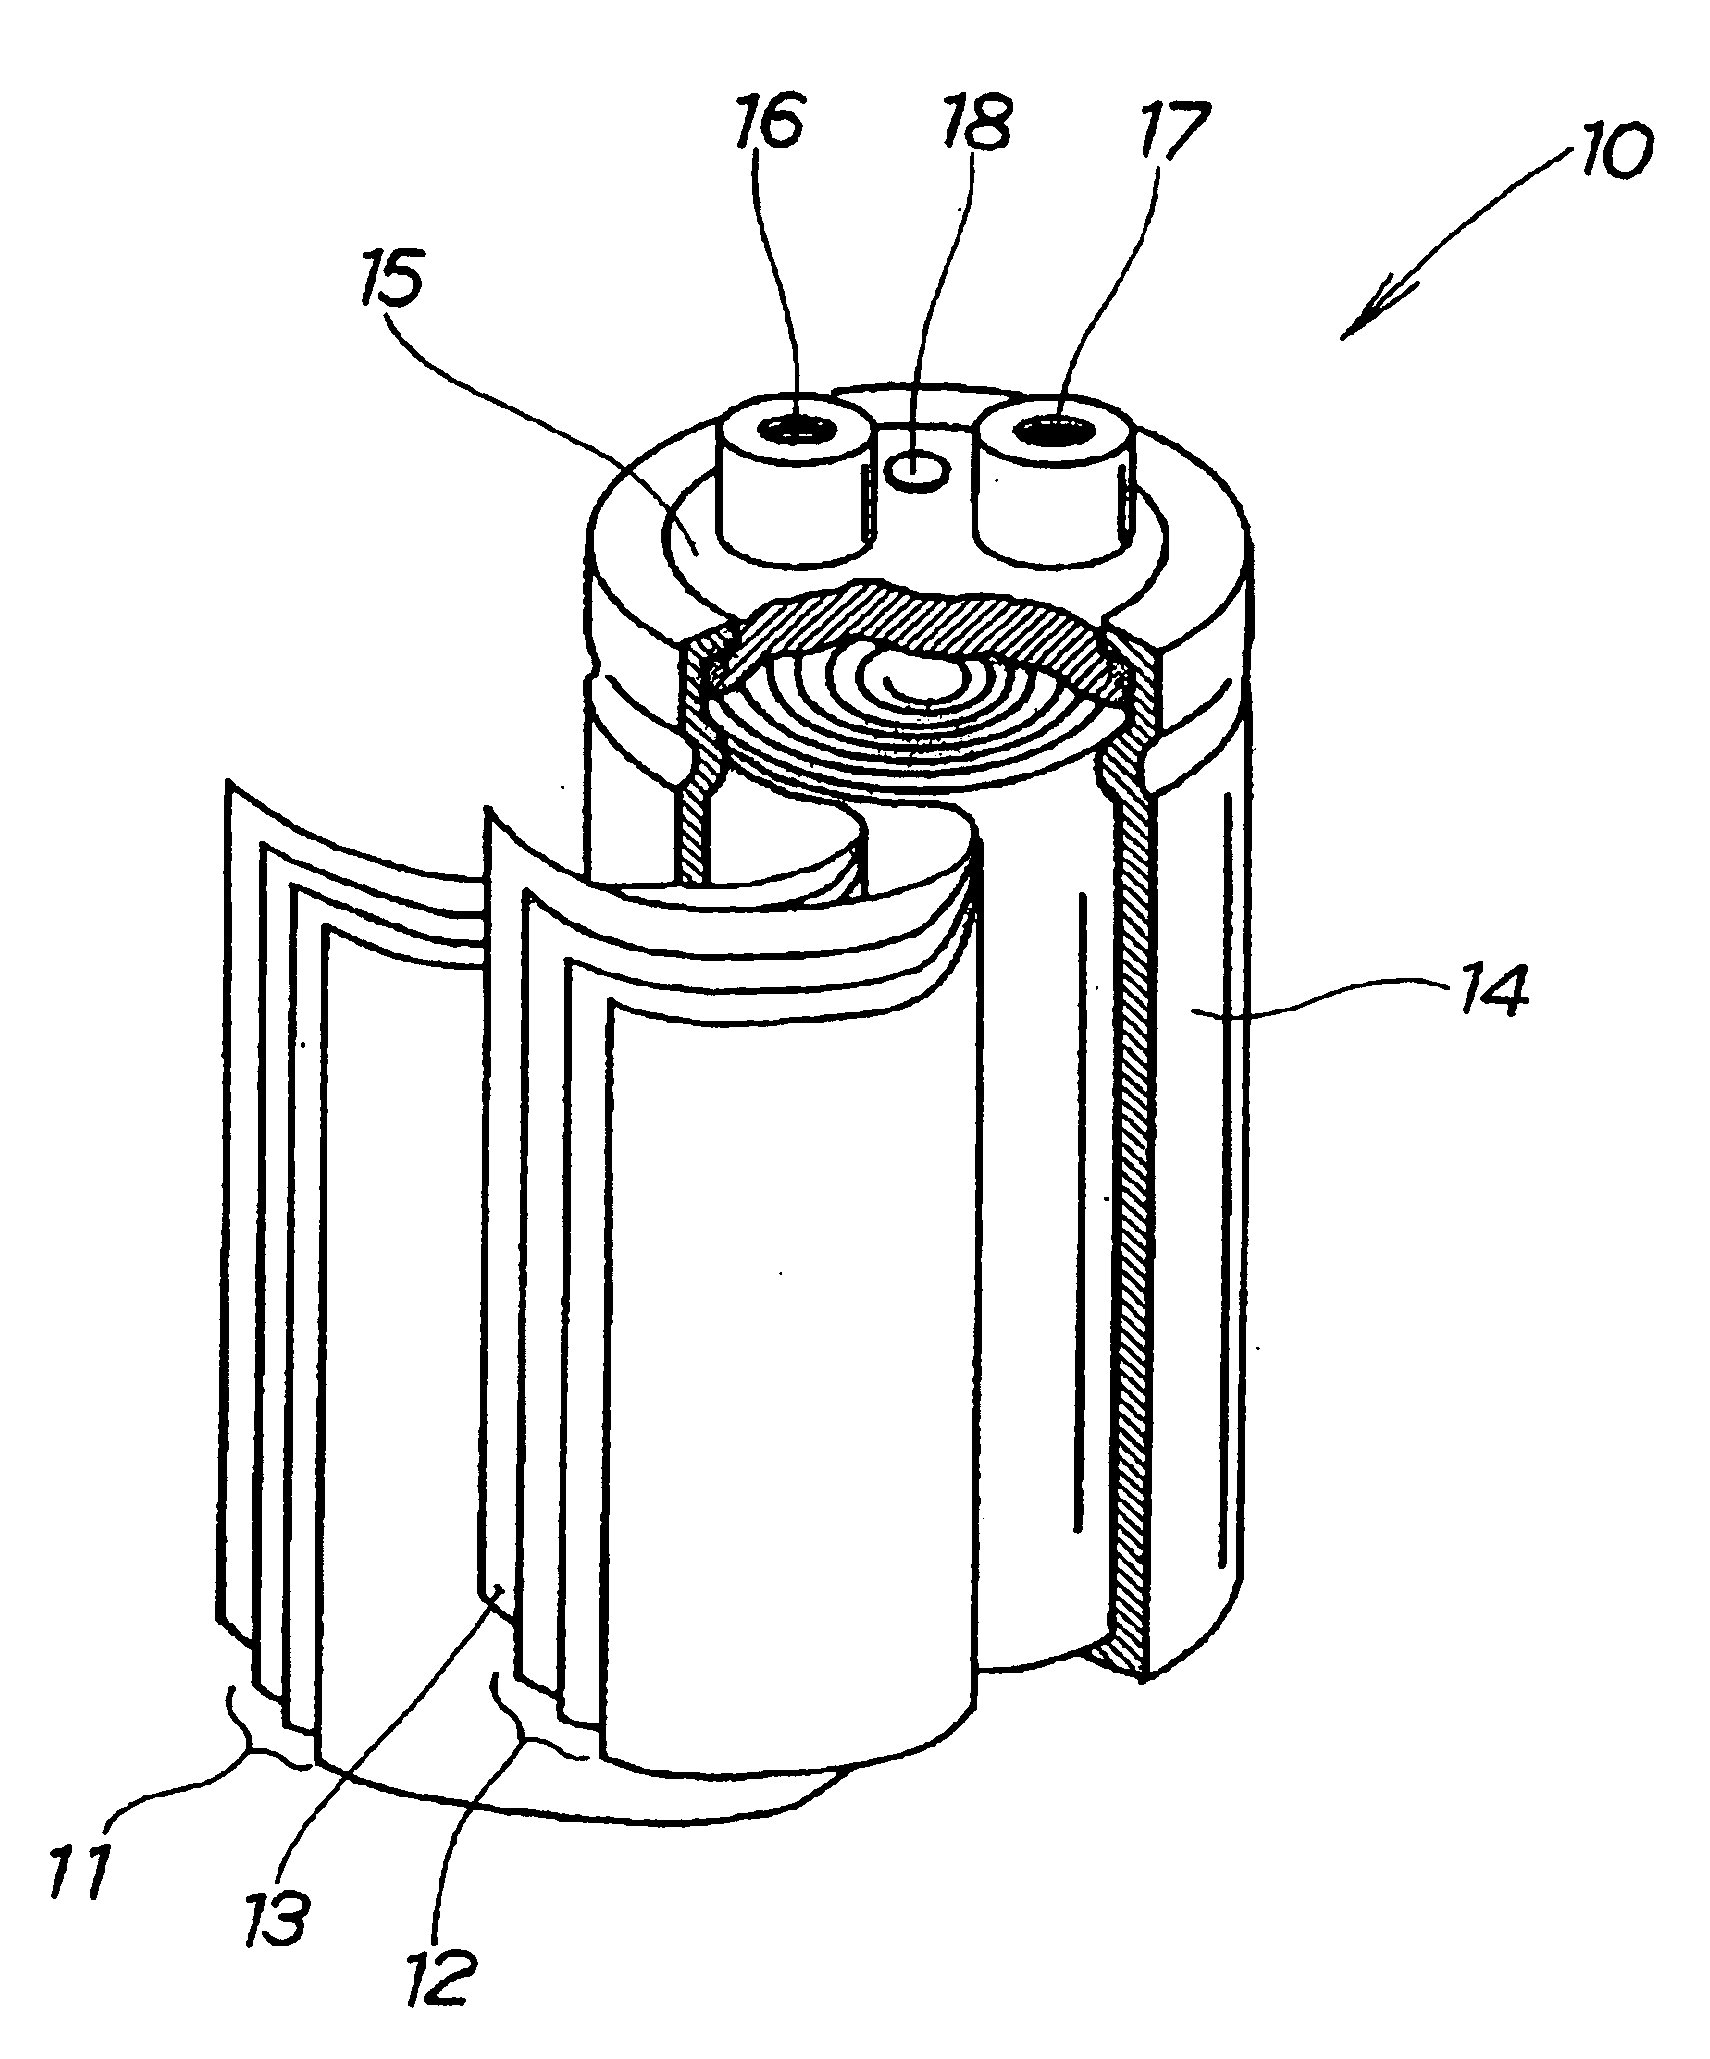 Metal collector foil for electric double layer capacitor, method of producing the metal collector foil, and electric double layer capacitor using the metal collector foil